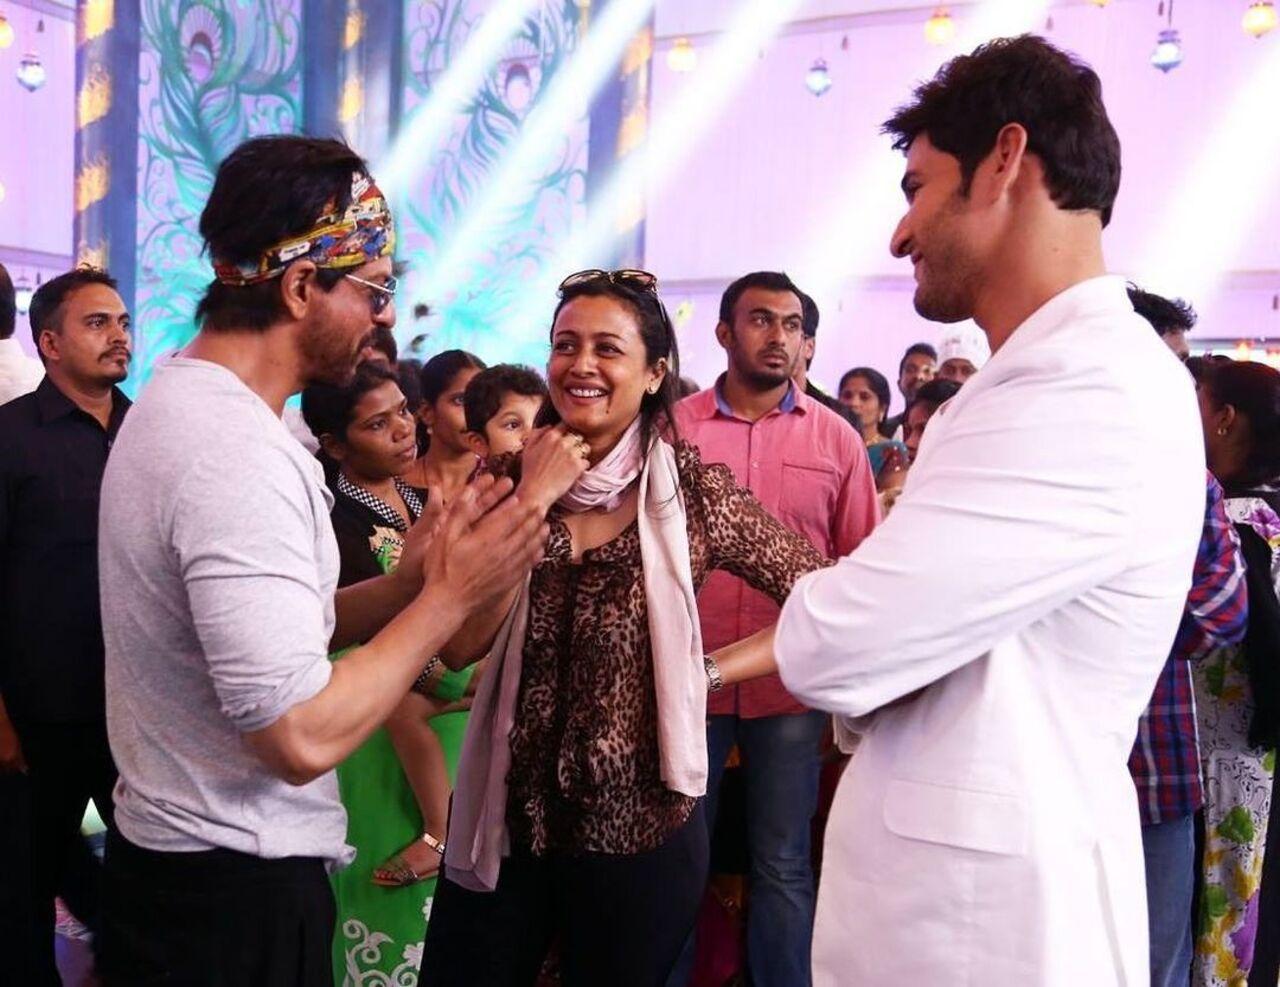 Not just the Telugu film industry, but Mahesh Babu is loved and respected by artists from across the country. Here is having a happy chat with superstar Shah Rukh Khan. Joining them is Namrata Shirodkar, who is herself a former actress